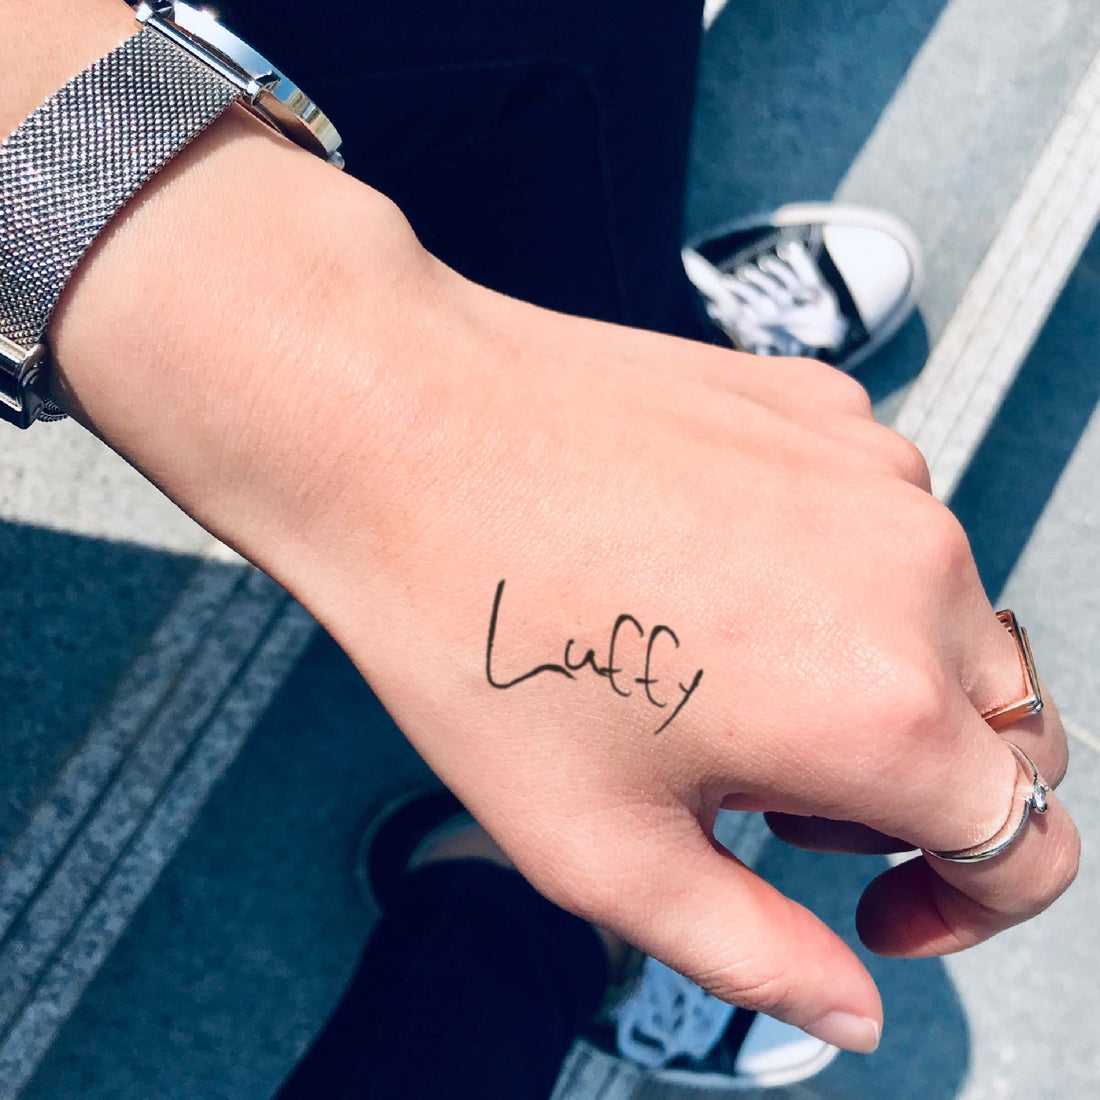 Luffy custom temporary tattoo sticker design idea inspiration meanings removal arm wrist hand words font name signature calligraphy lyrics tour concert outfits merch accessory gift souvenir costumes wear dress up code